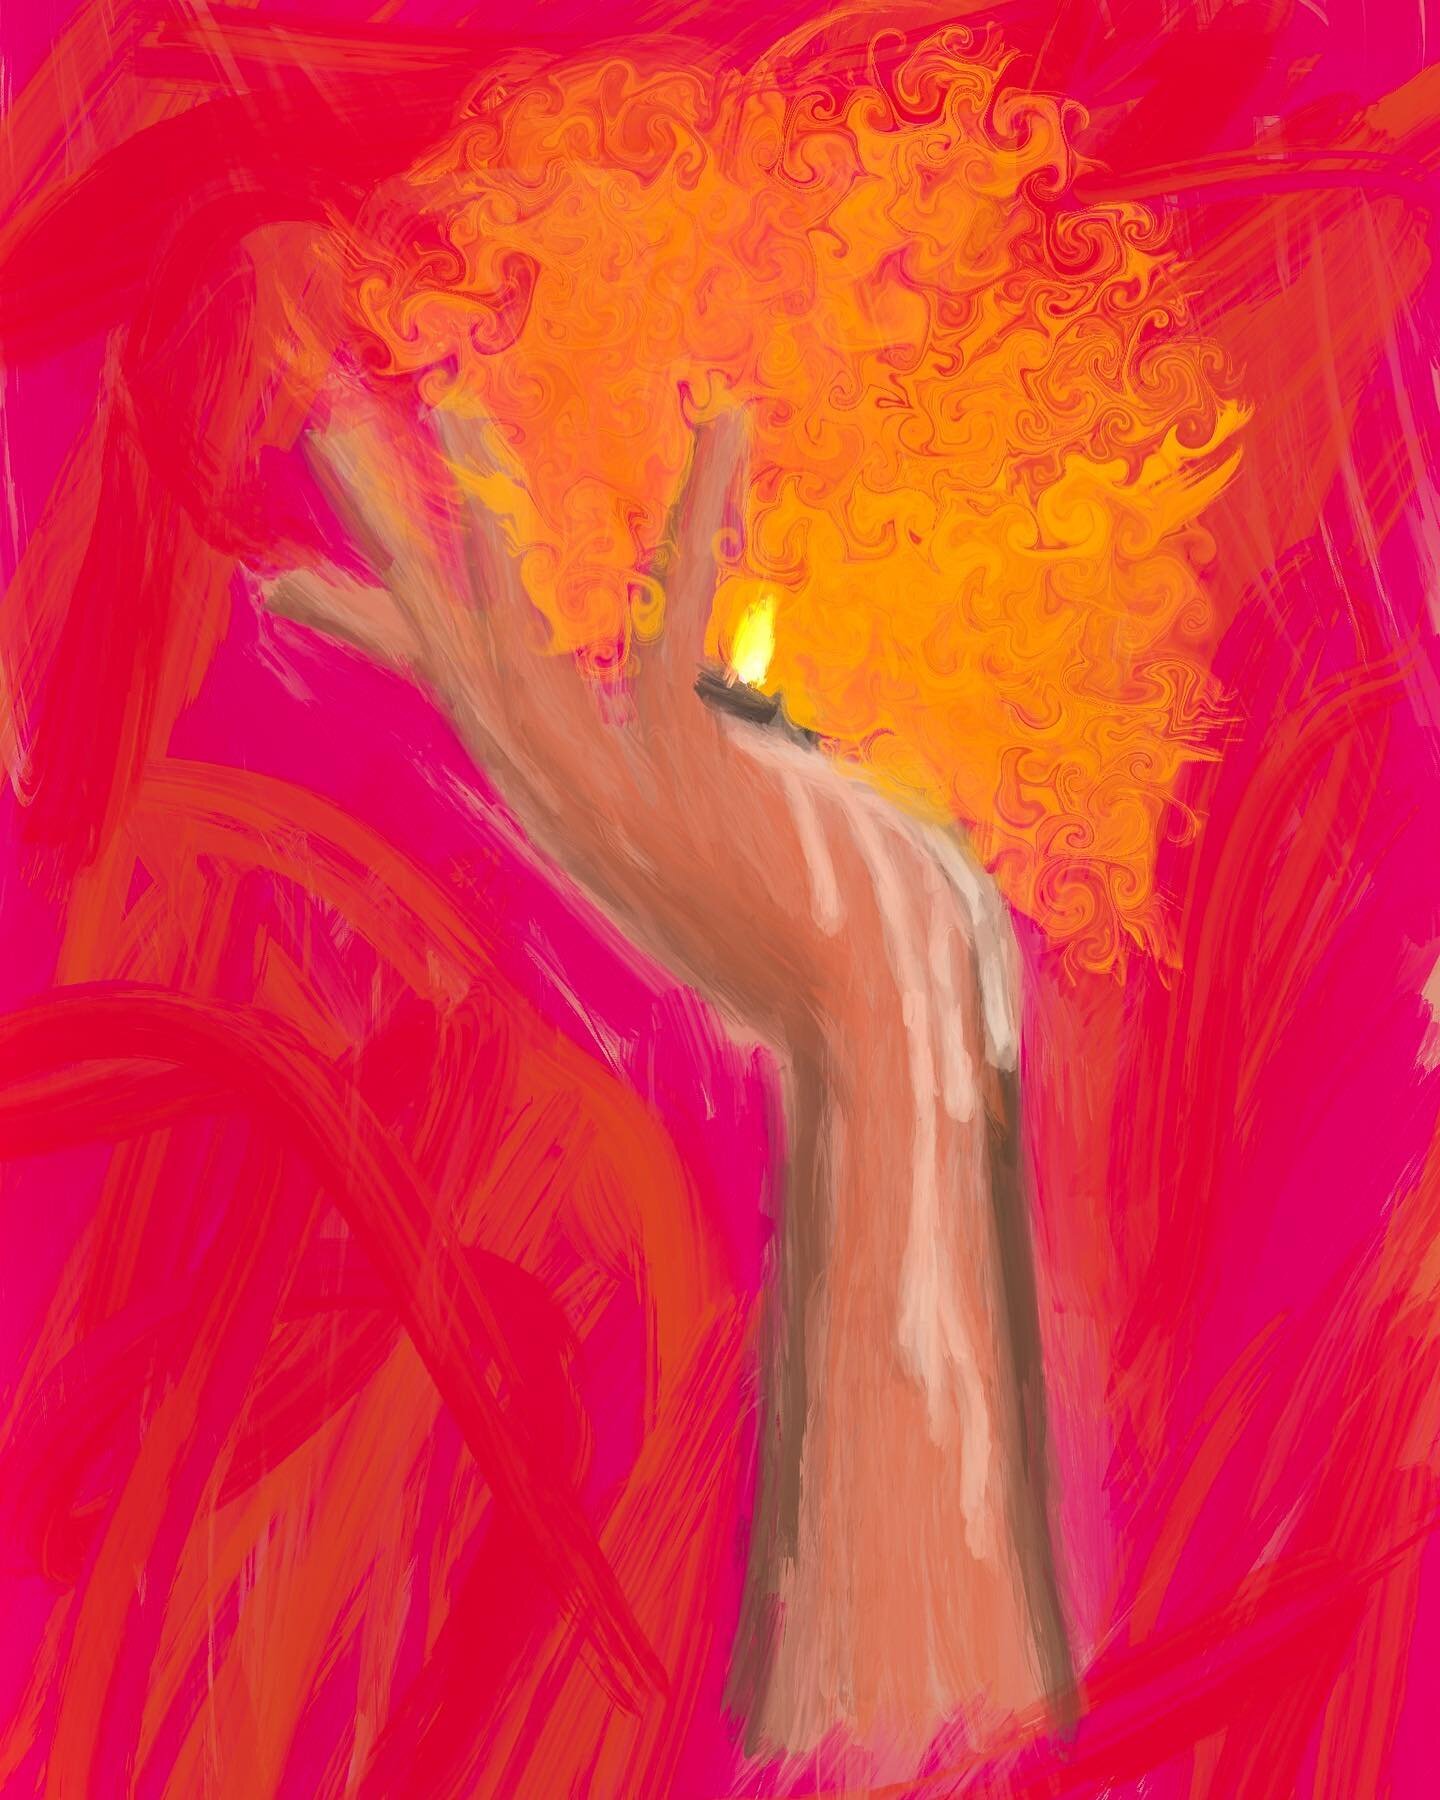 how songs make me feel: &ldquo;Light My Fire&rdquo; by the Doors 🚪🔥

🌟all print sizes available starting at $15
🌟free delivery + pick up in NYC 🗽
🌟custom pieces are available per request!
.
.
.
.
.
.
.
.
.
.
.
#art #procreate #procreateart #oil